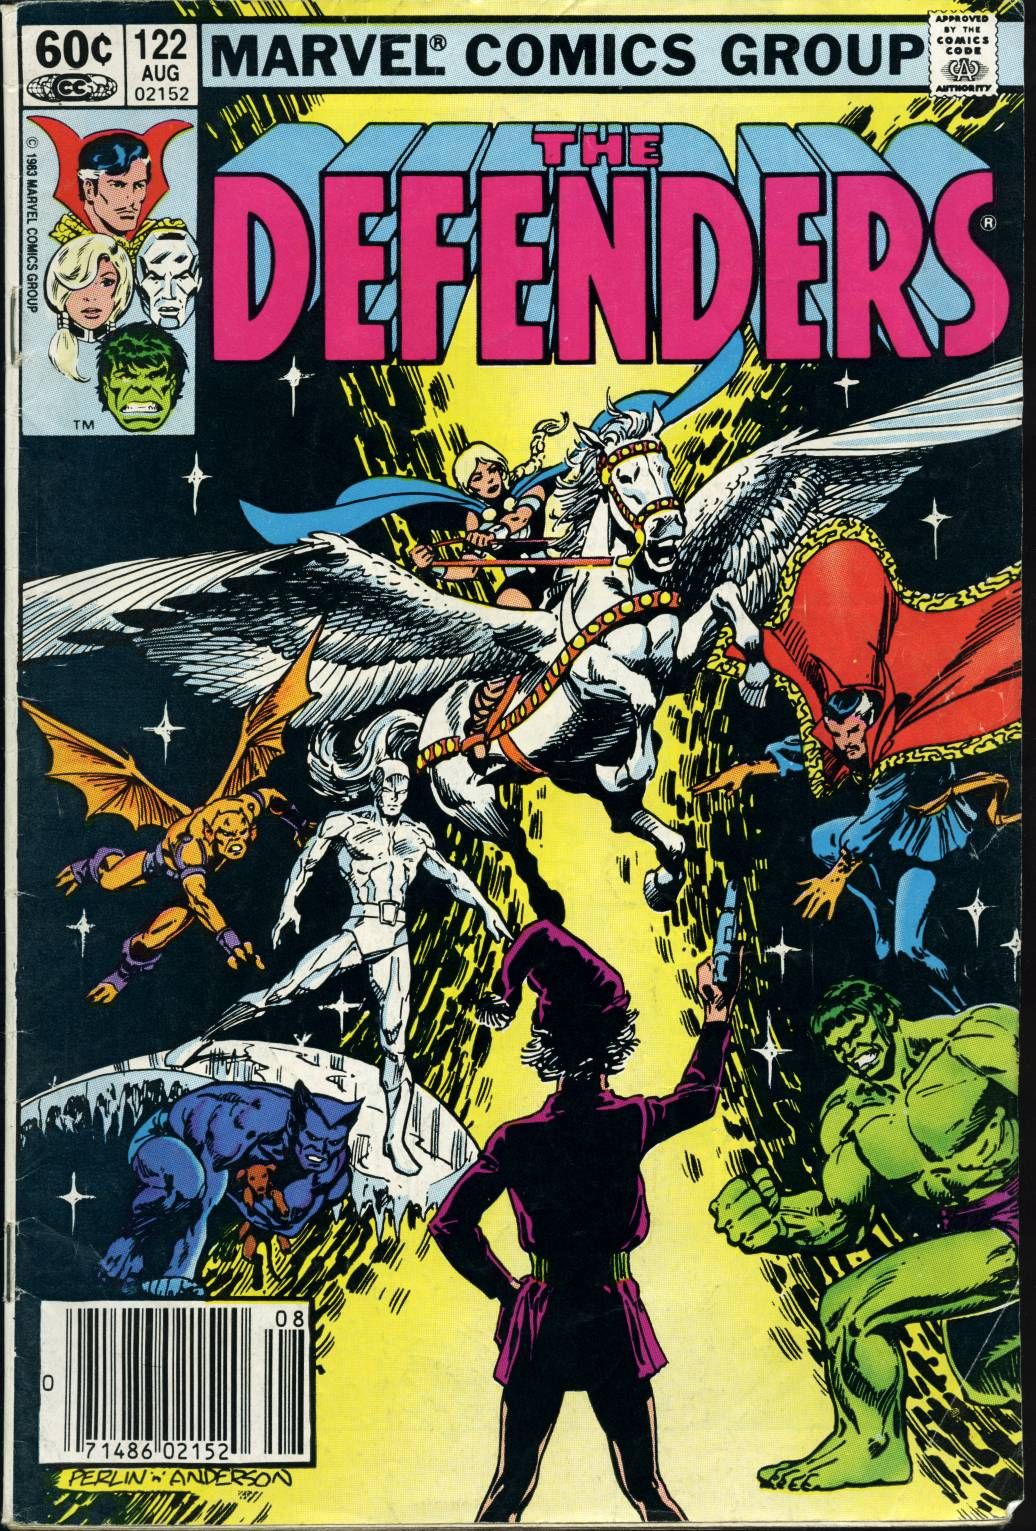 The cover of Defenders #122